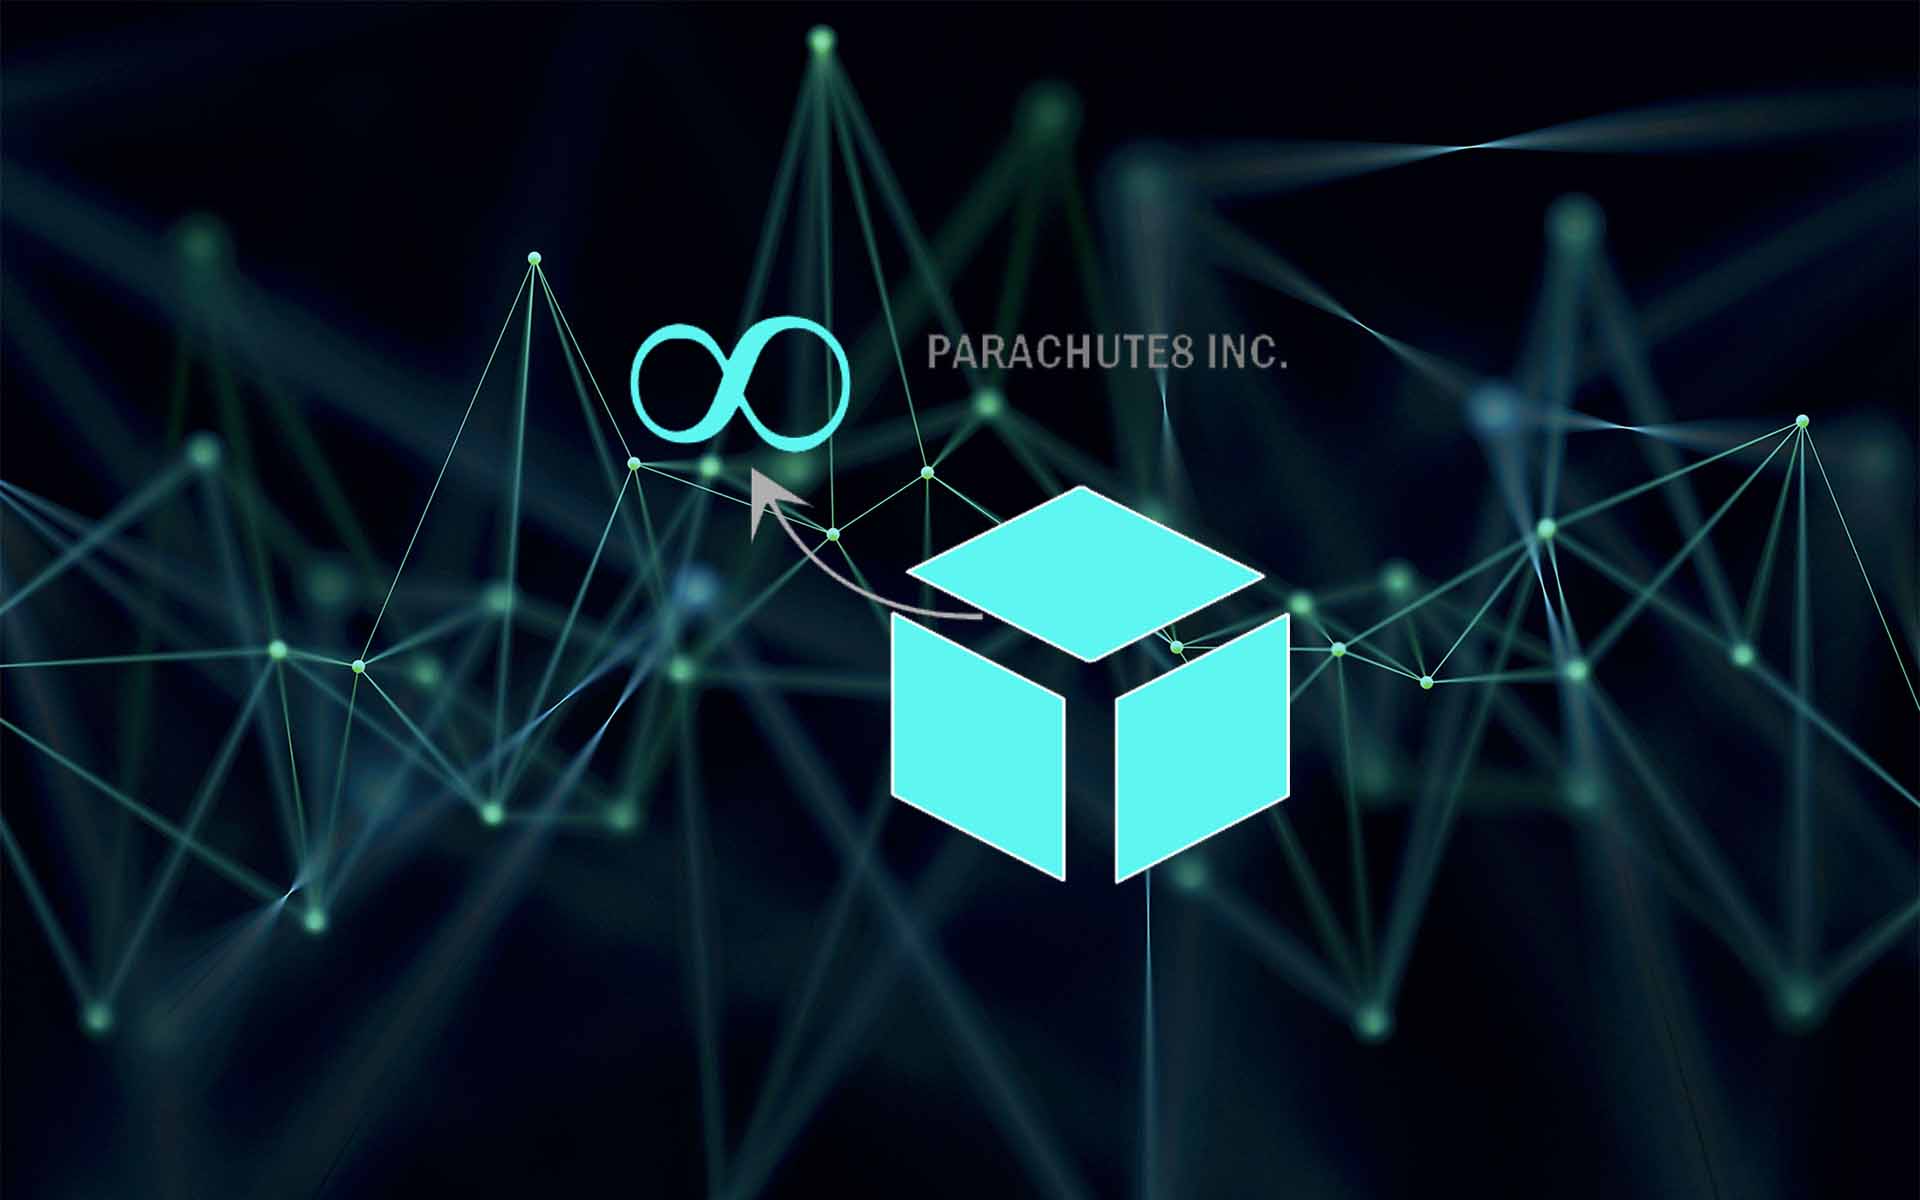 Parachute8 Readies For ICO Pre-Sale - Proprietary Algorithms Provide Security to Participating Individuals and Companies